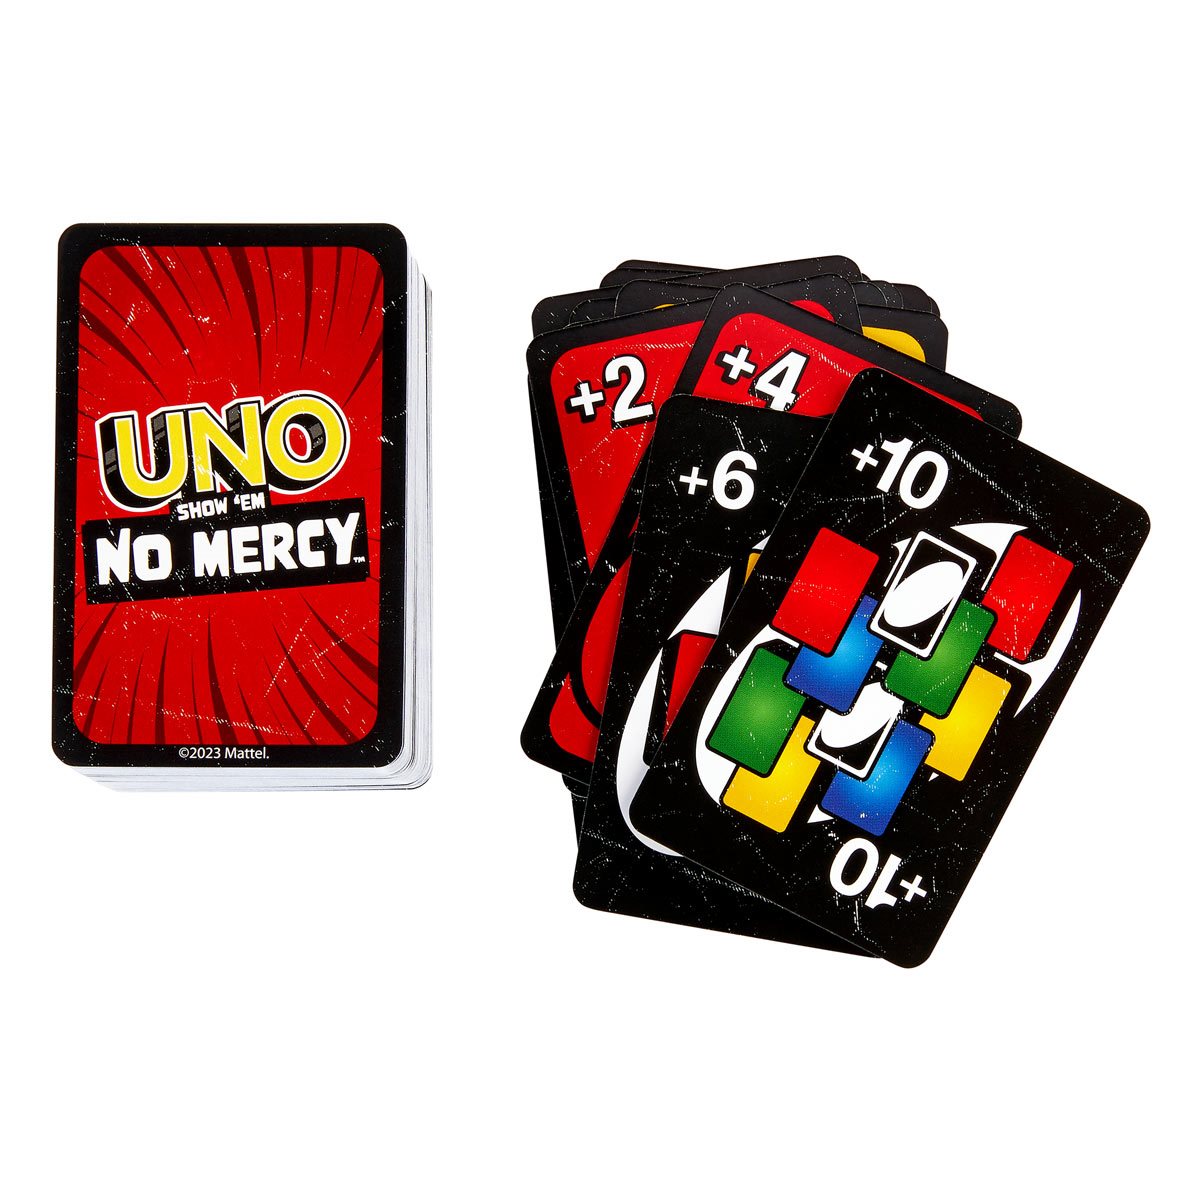 UNO Show 'Em No Mercy, Imagine stacking with a Draw 10? Now you don't have  to with UNO Show 'Em No Mercy., By UNO